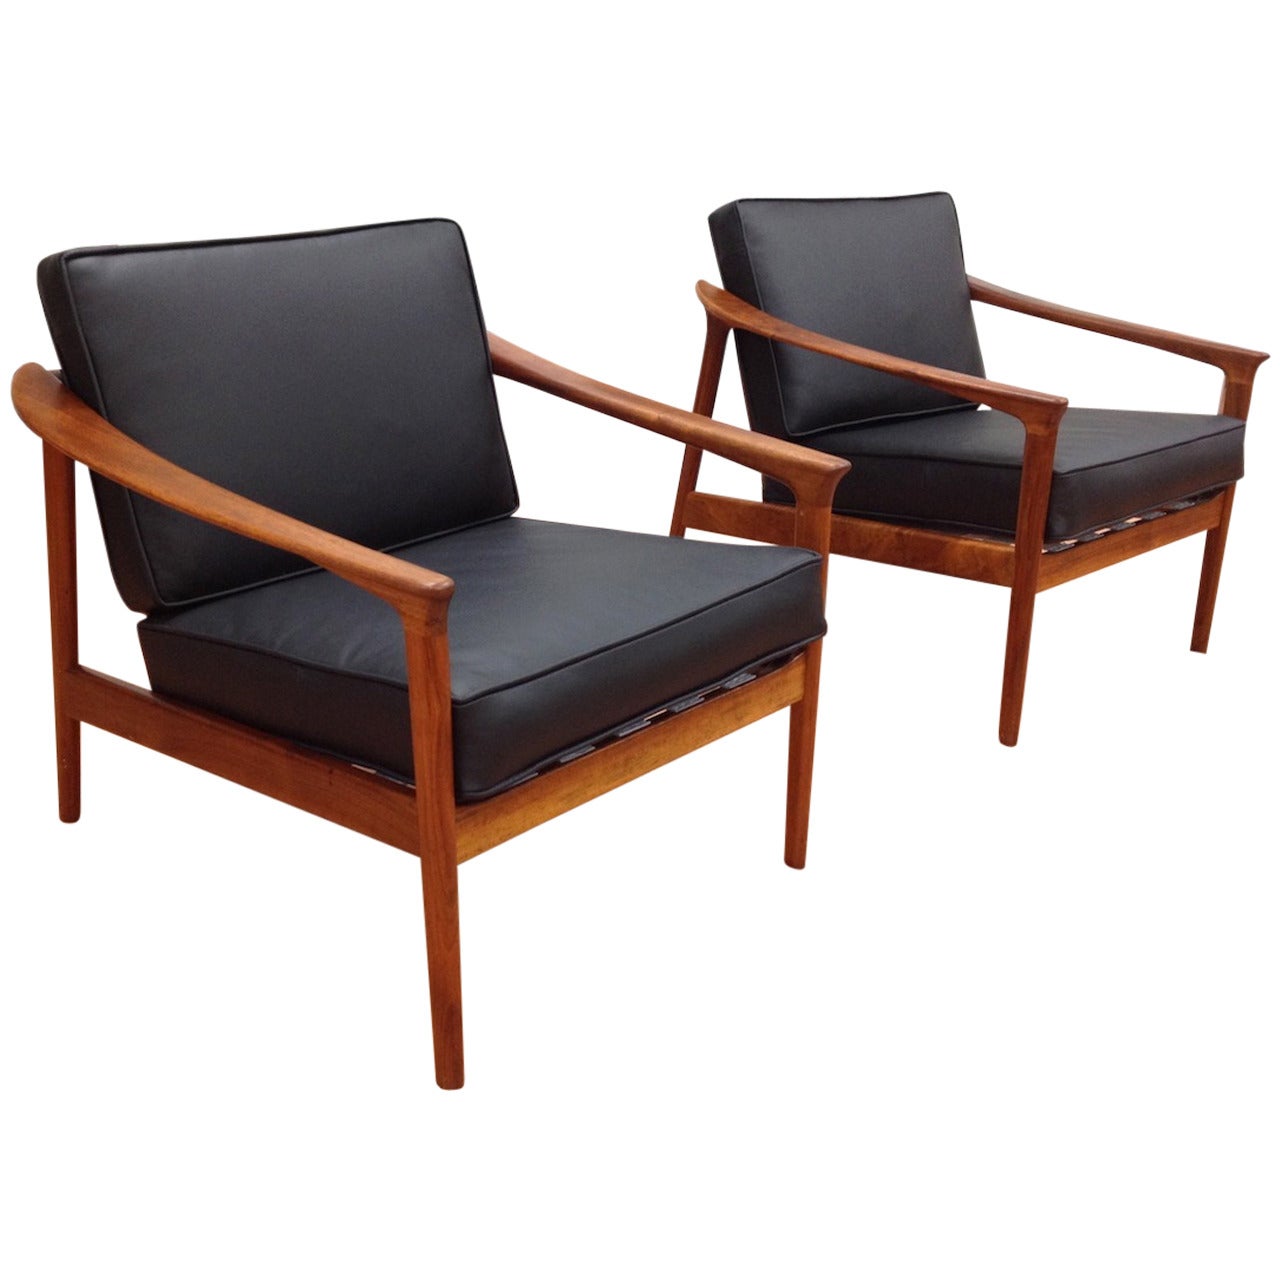 Pair of DUX Danish Modern Walnut Black Leather Lounge Chairs by Folke Ohlsson